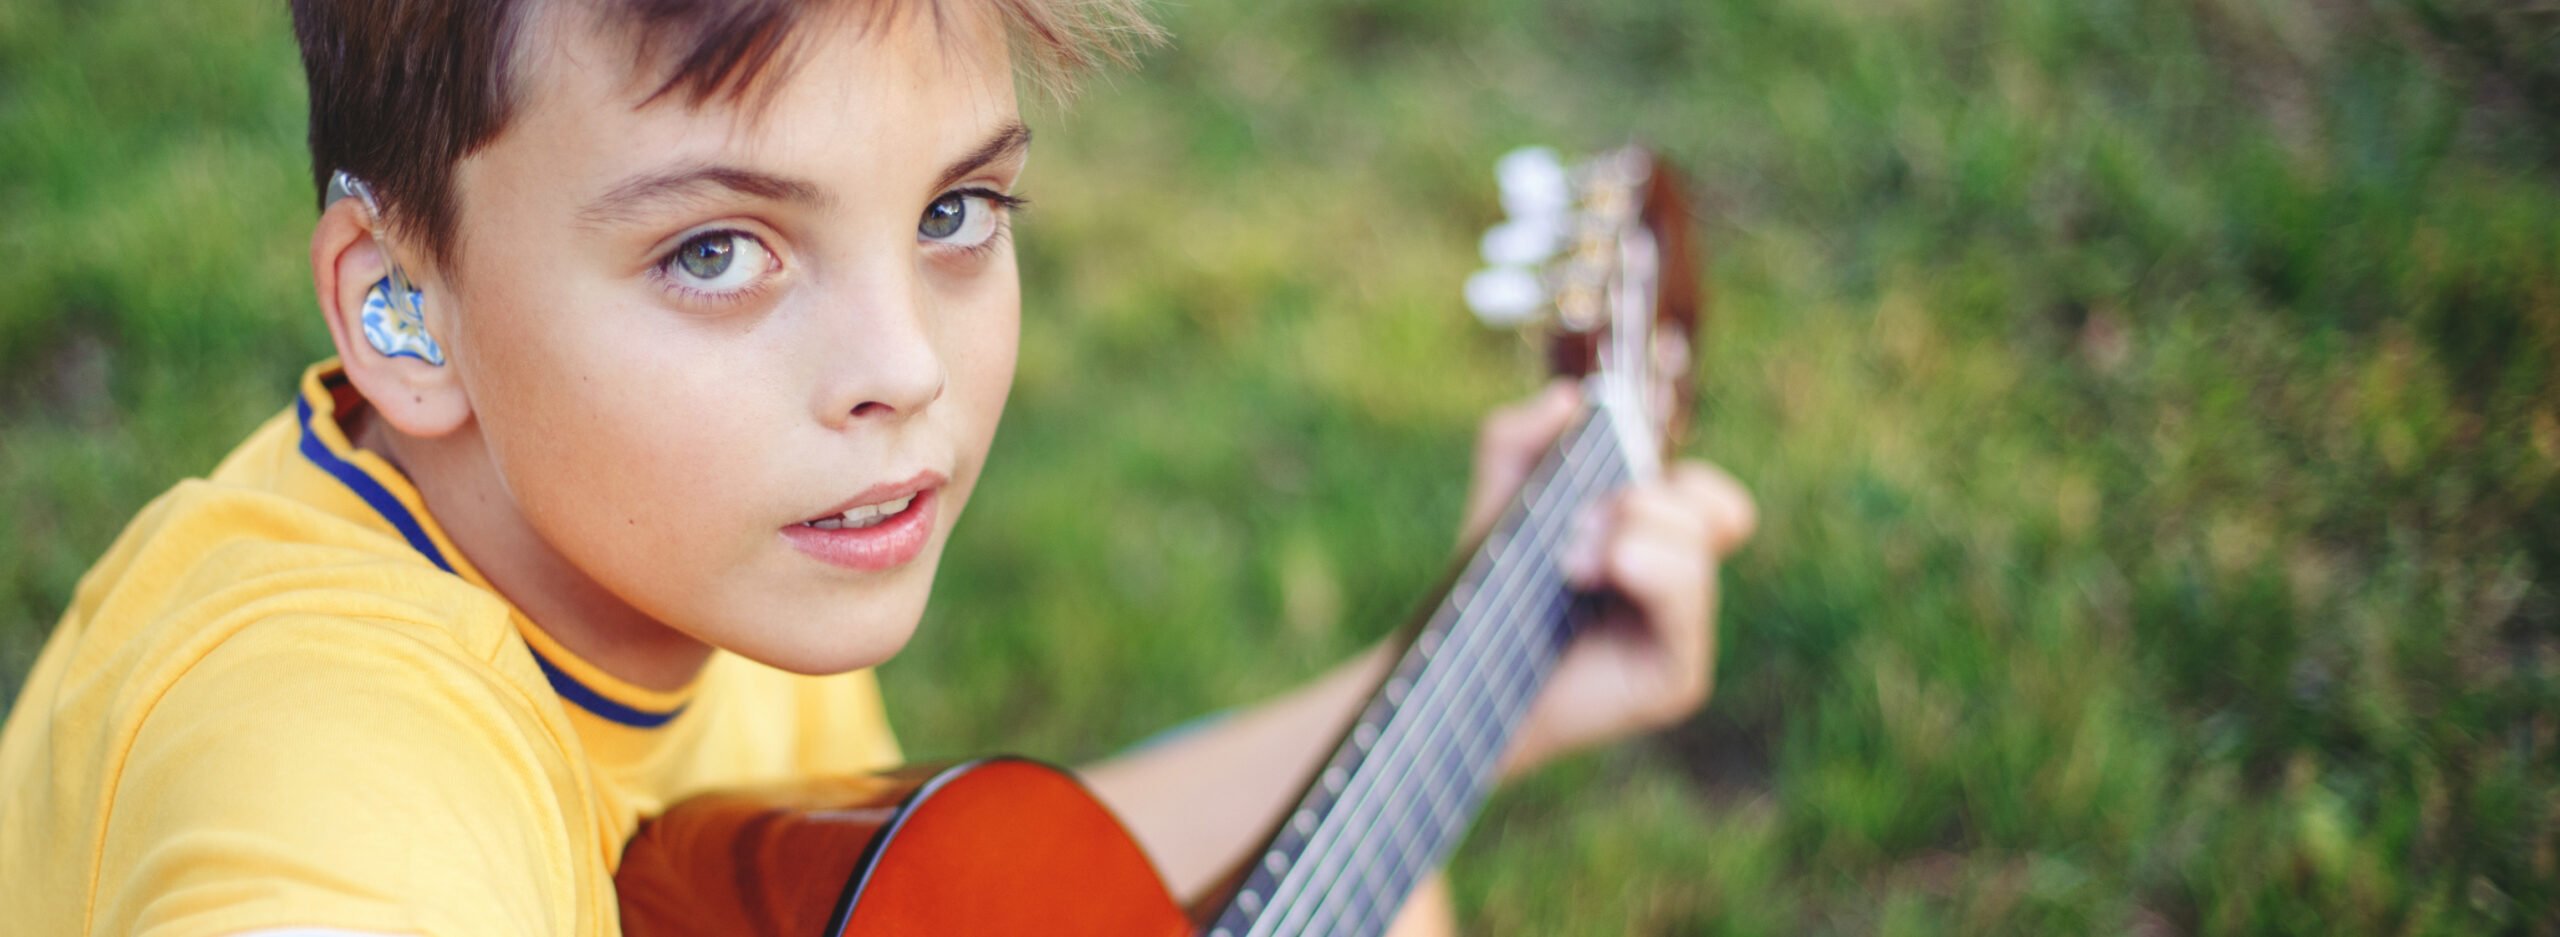 Hard of hearing preteen boy playing guitar outdoor. Child with hearing aids in ears playing music and singing song in park. Hobby art activity for children kids. Web banner header.